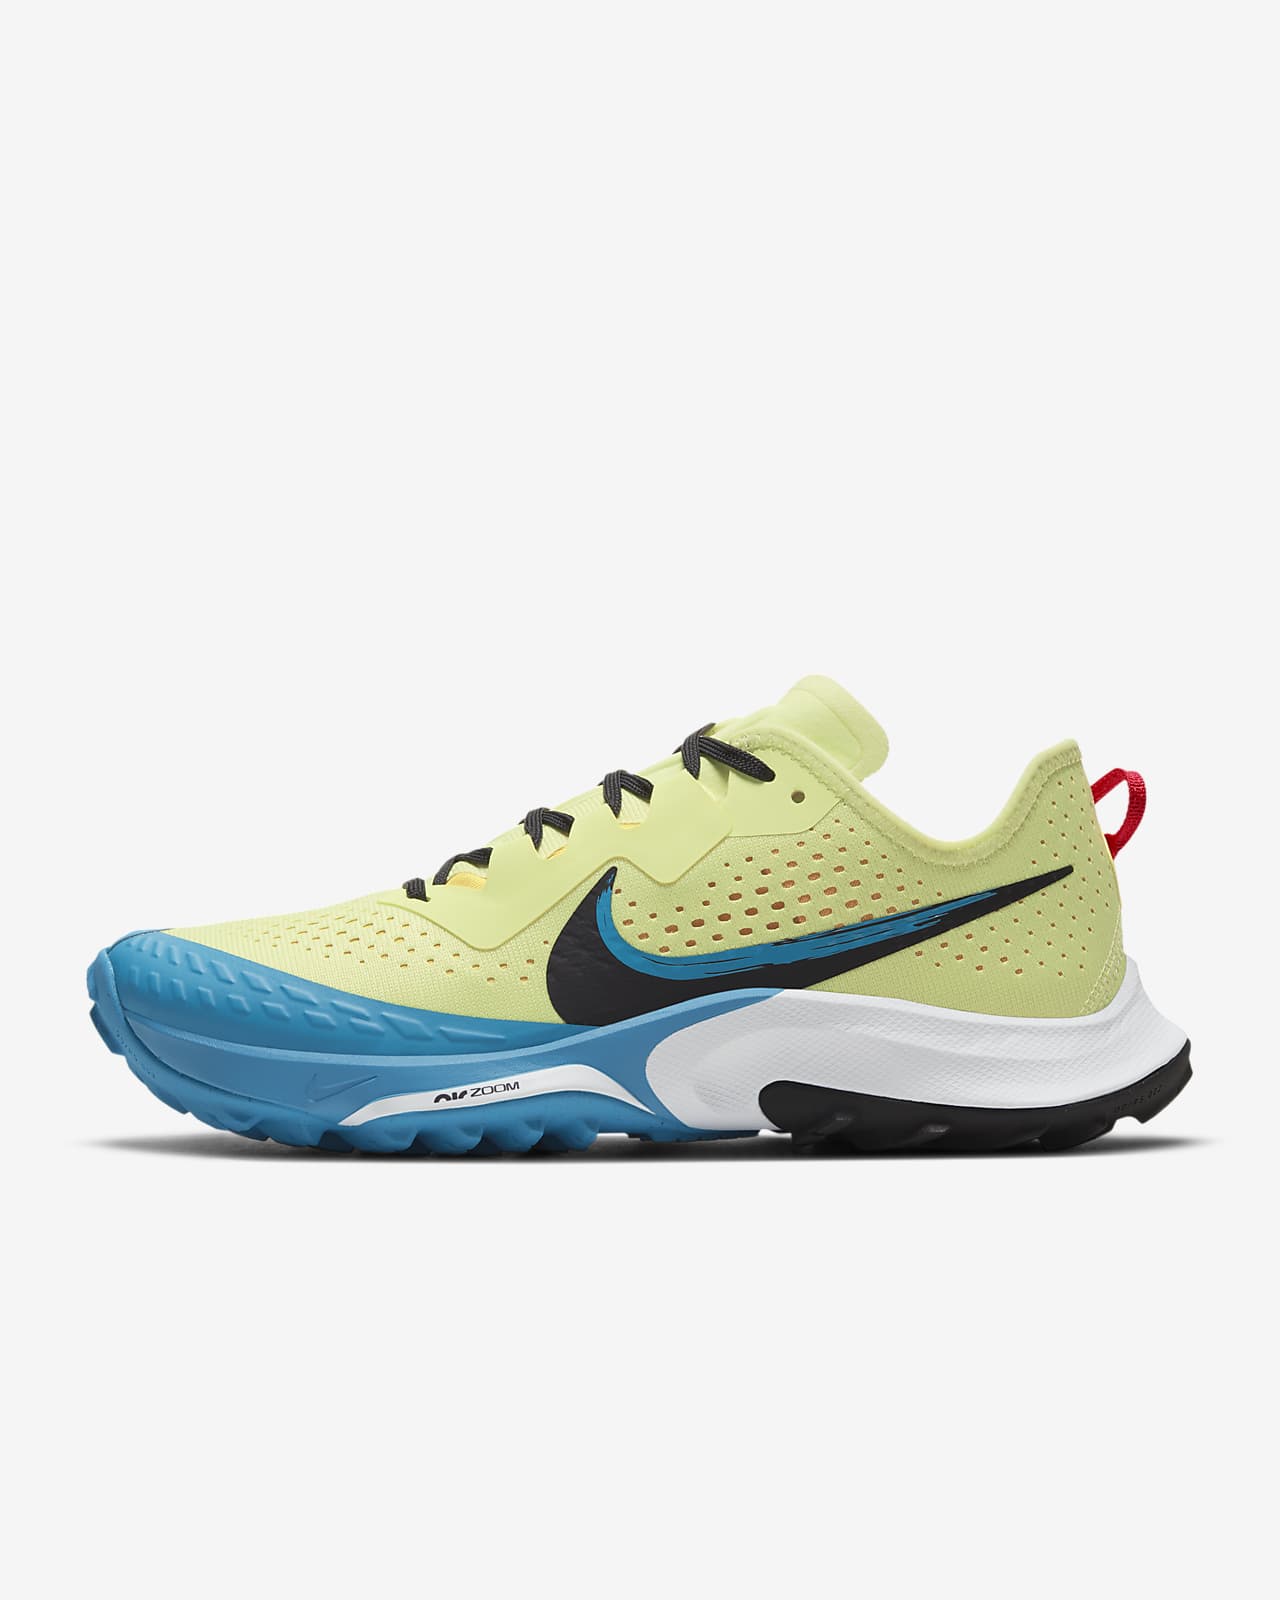 are nike zooms good running shoes